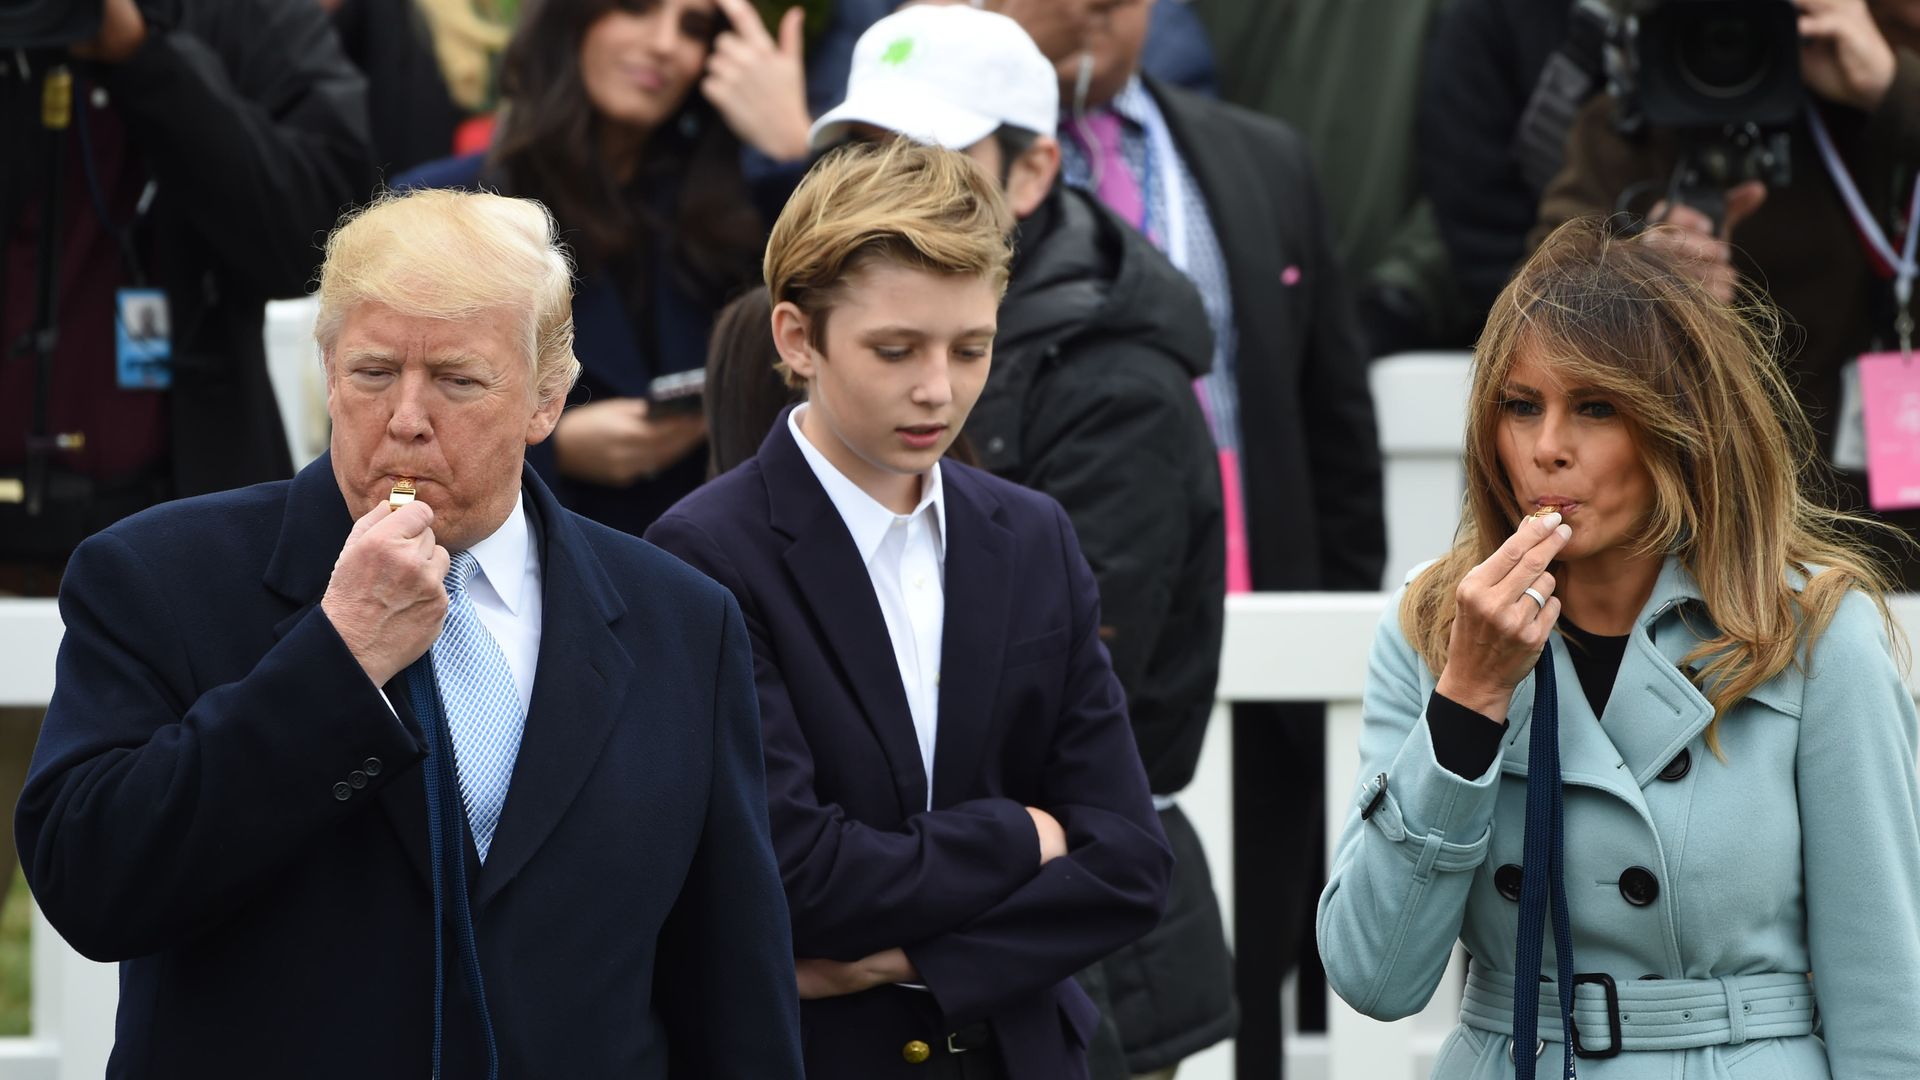 Photos: Trump family hosts second Easter Egg Roll - Axios1920 x 1080